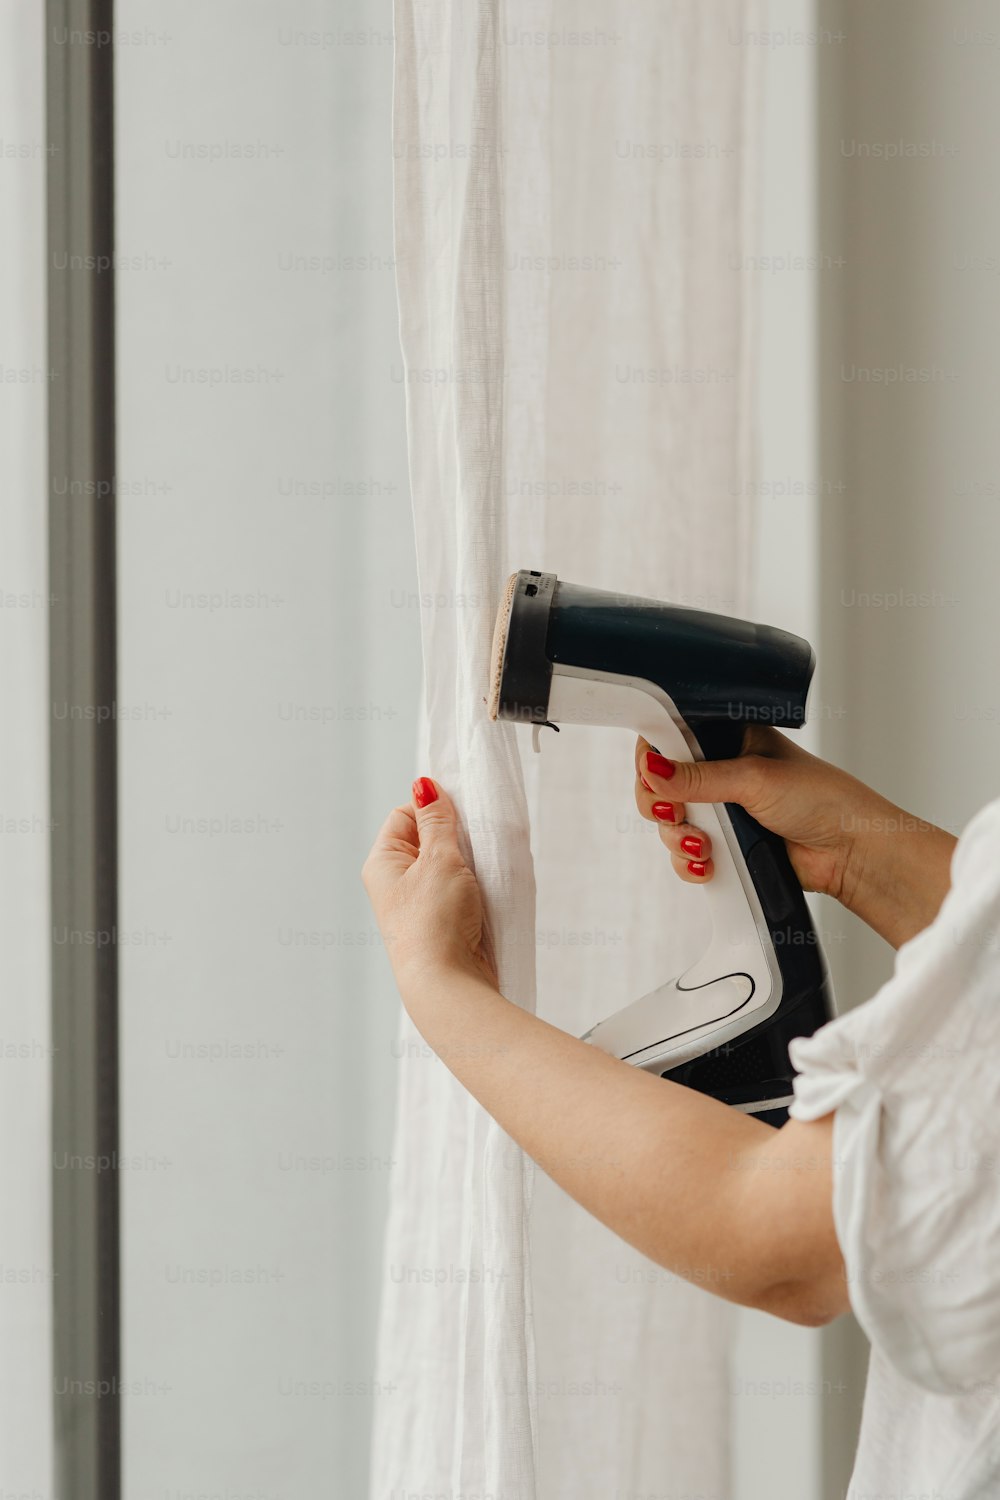 a woman is using a hair dryer to dry her hair